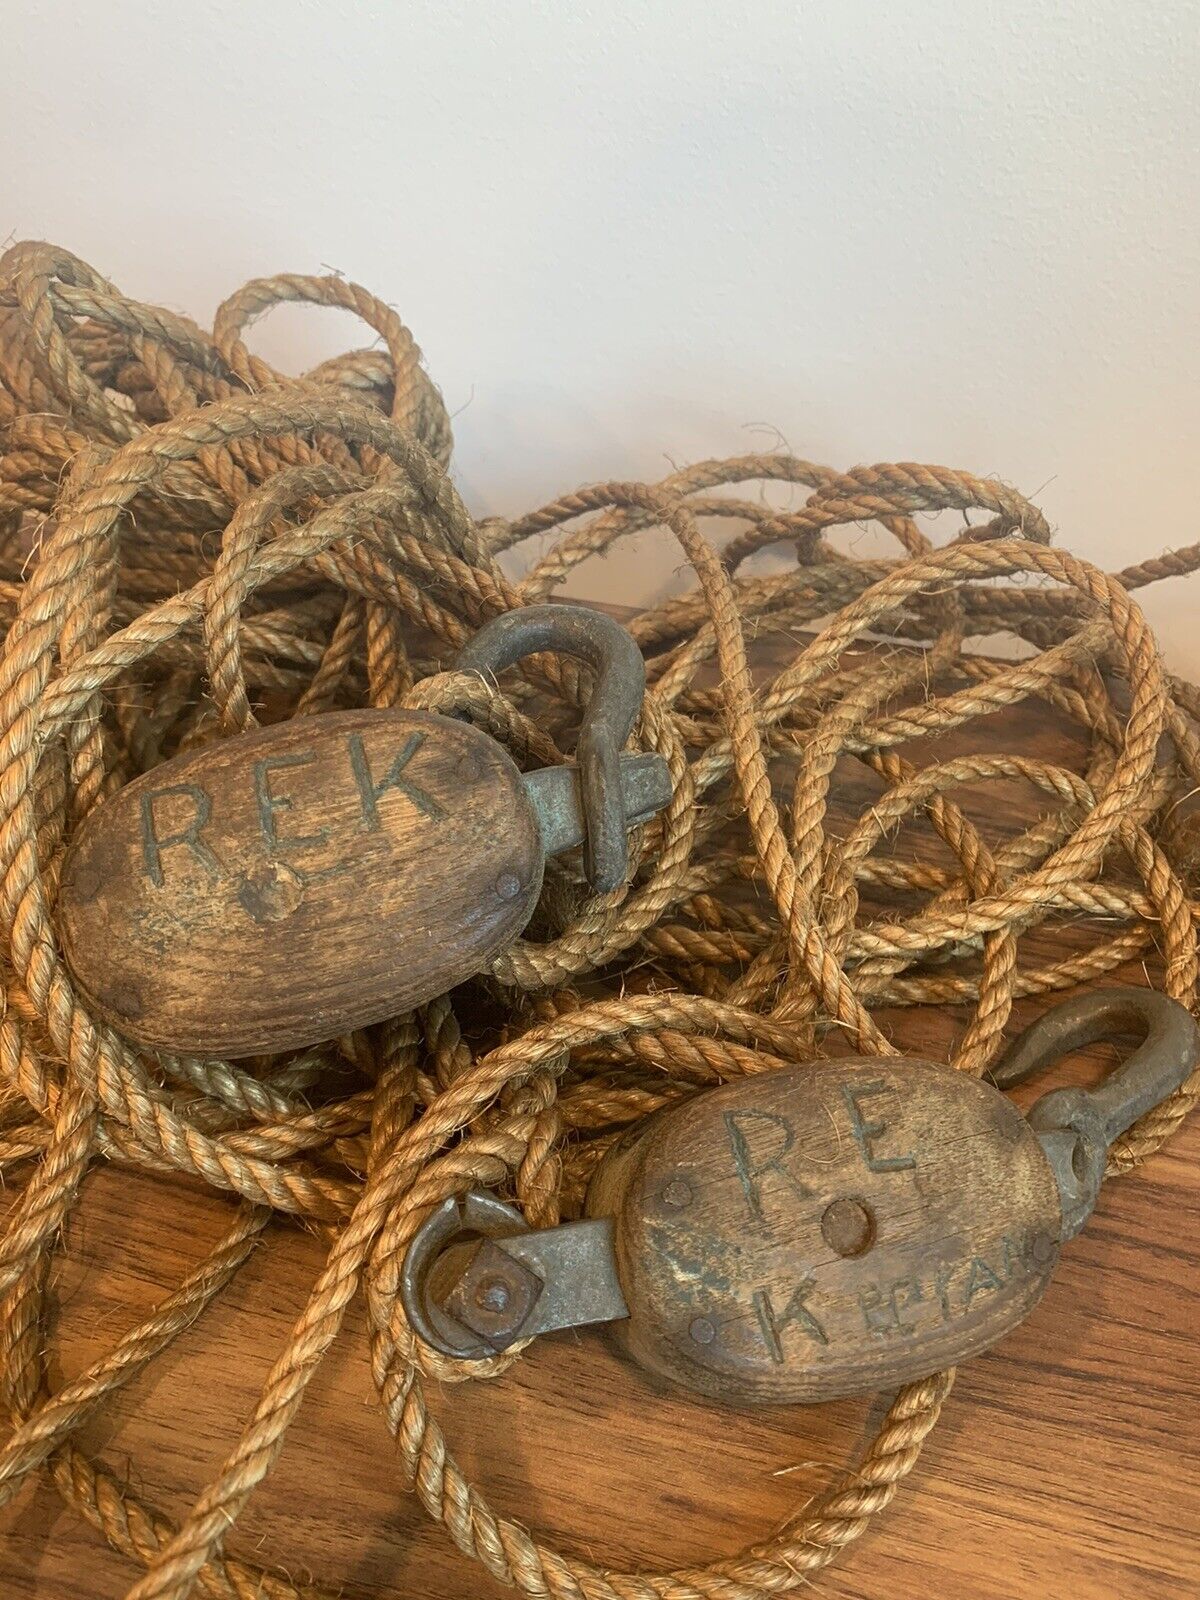 B & L Block Co 2 Antique Block and Tackles with old rope